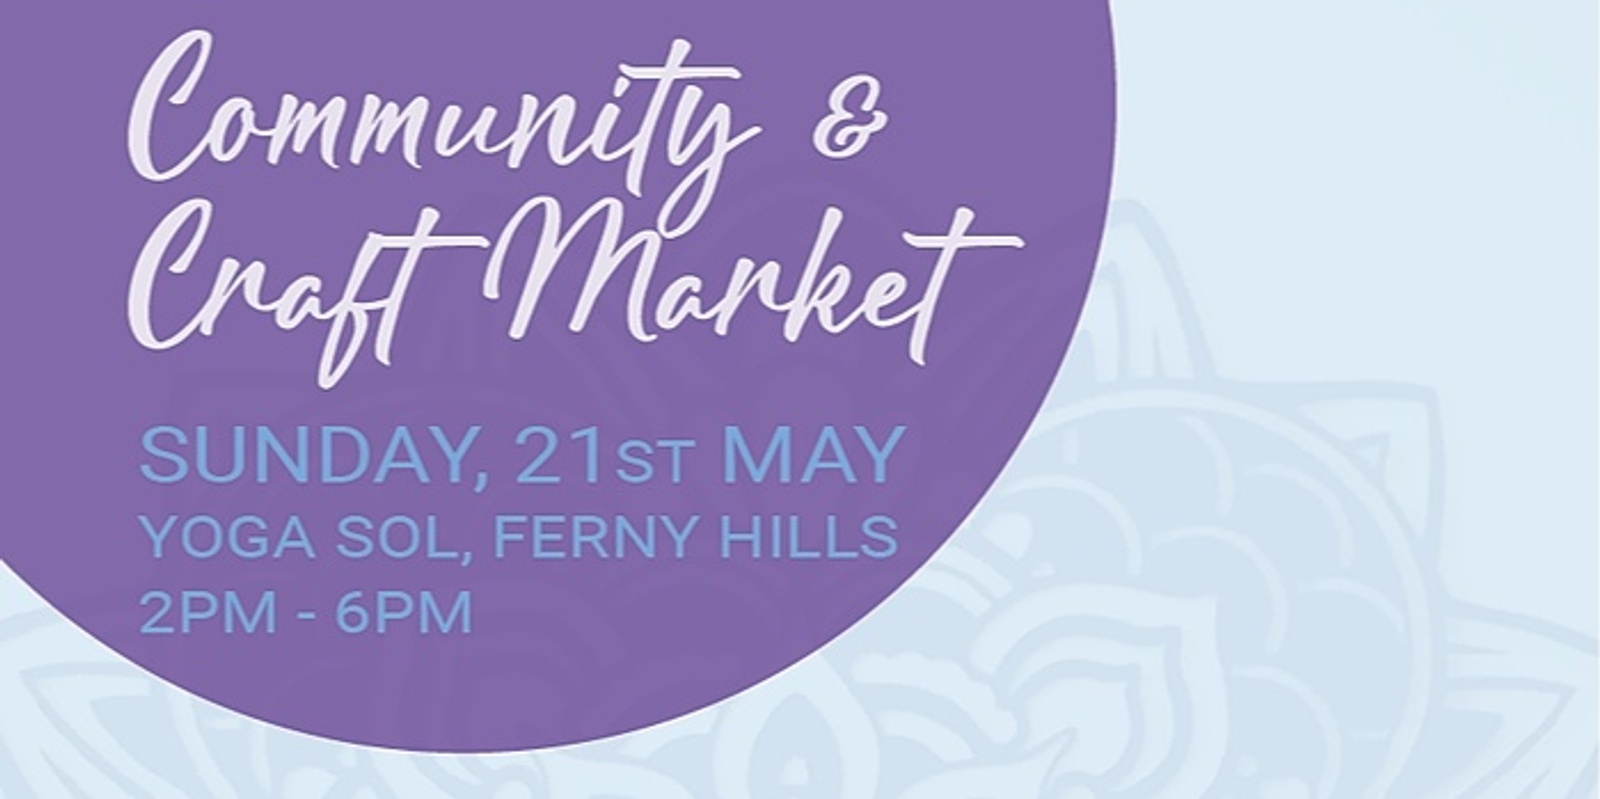 Banner image for Community and Craft Market at Yoga Sol